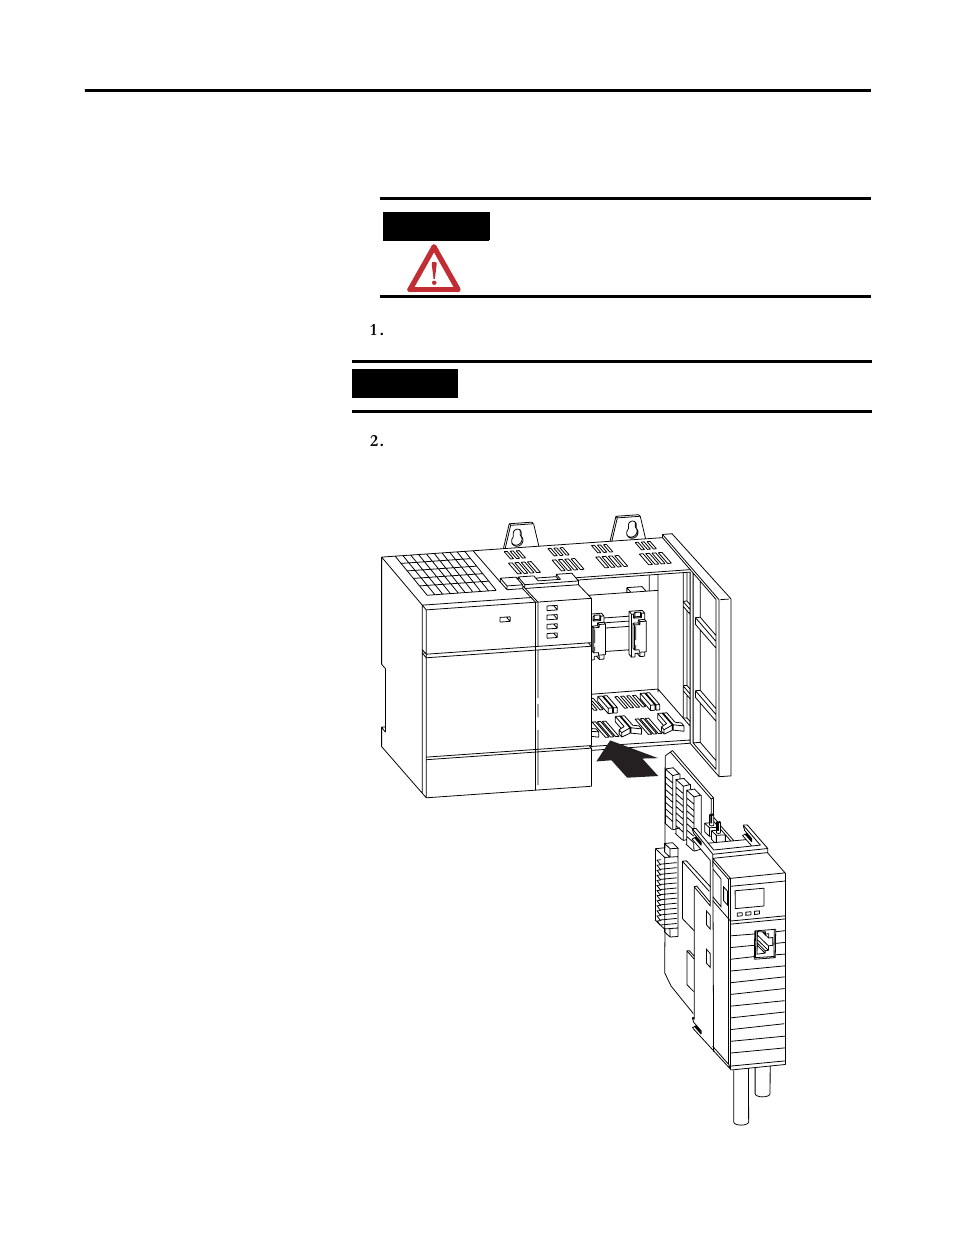 Insert the 1747-scnr scanner into the chassis | Rockwell Automation 1747-SCNR ControlNet Scanner Module Reference Manual User Manual | Page 16 / 144